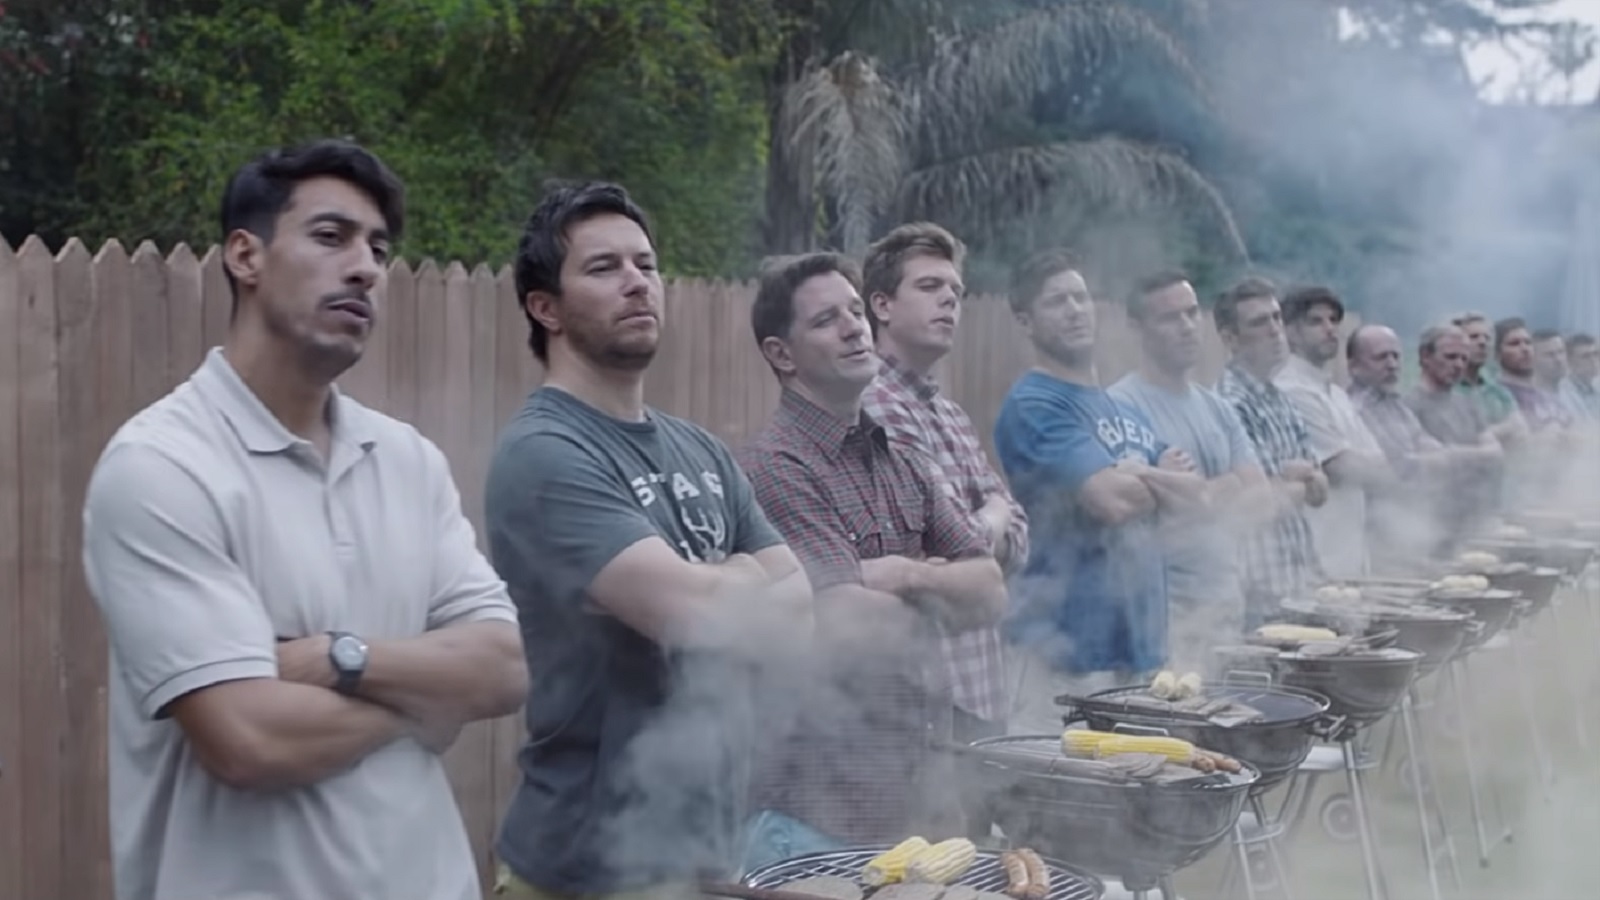 Gillette Wants to Bring the Best in Men. But Does It?